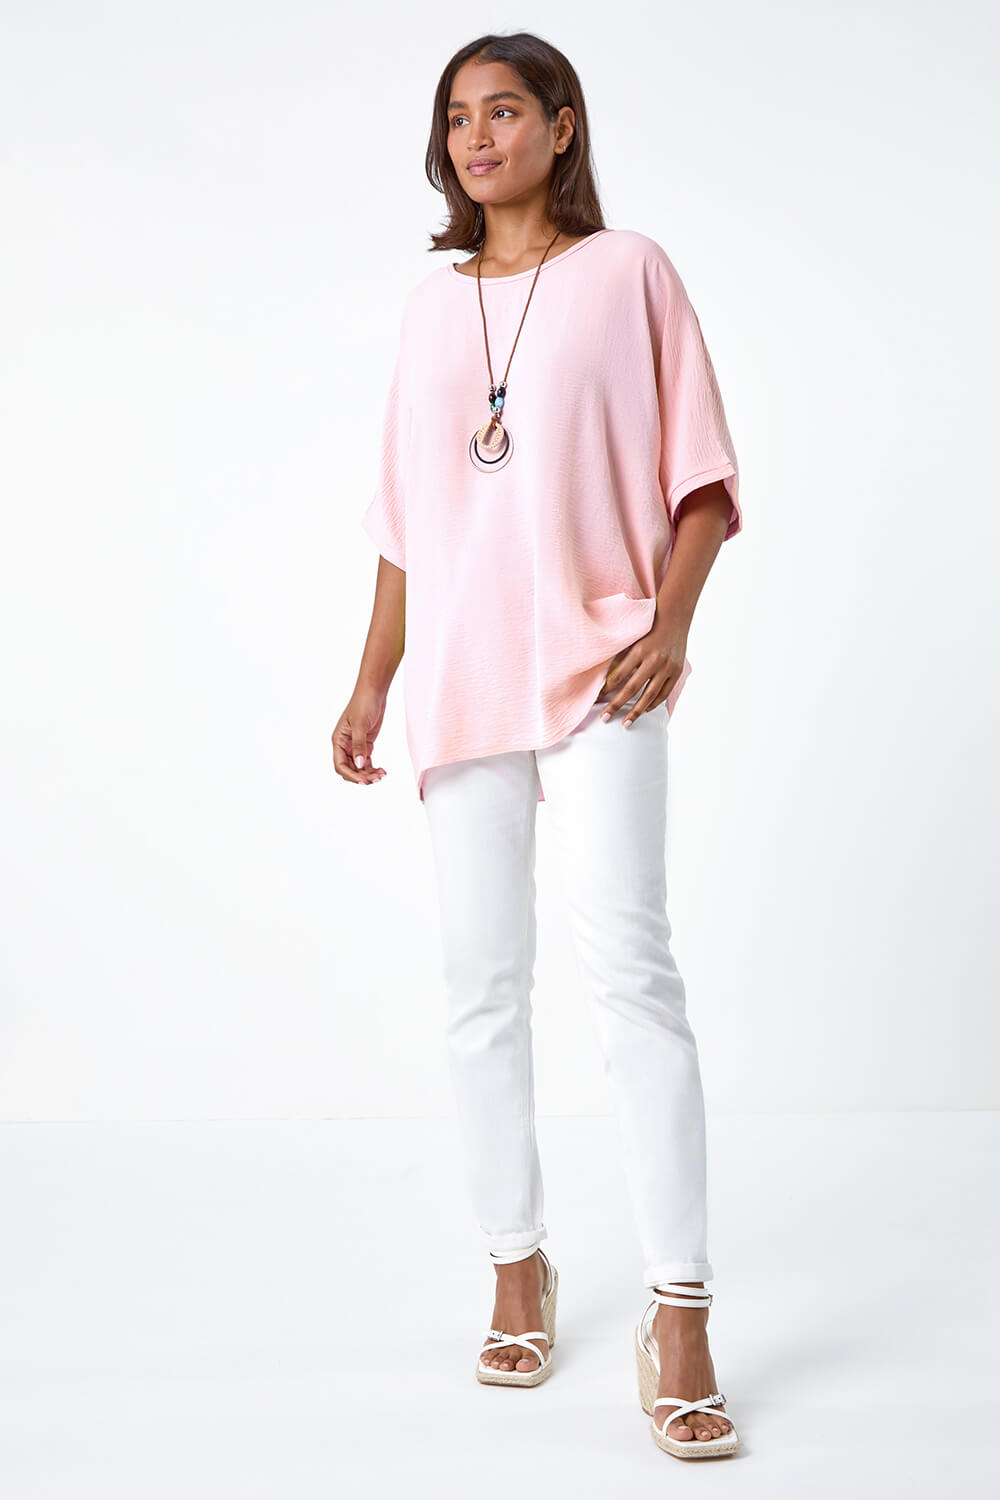 PINK Plain Tunic Top with Necklace, Image 2 of 5